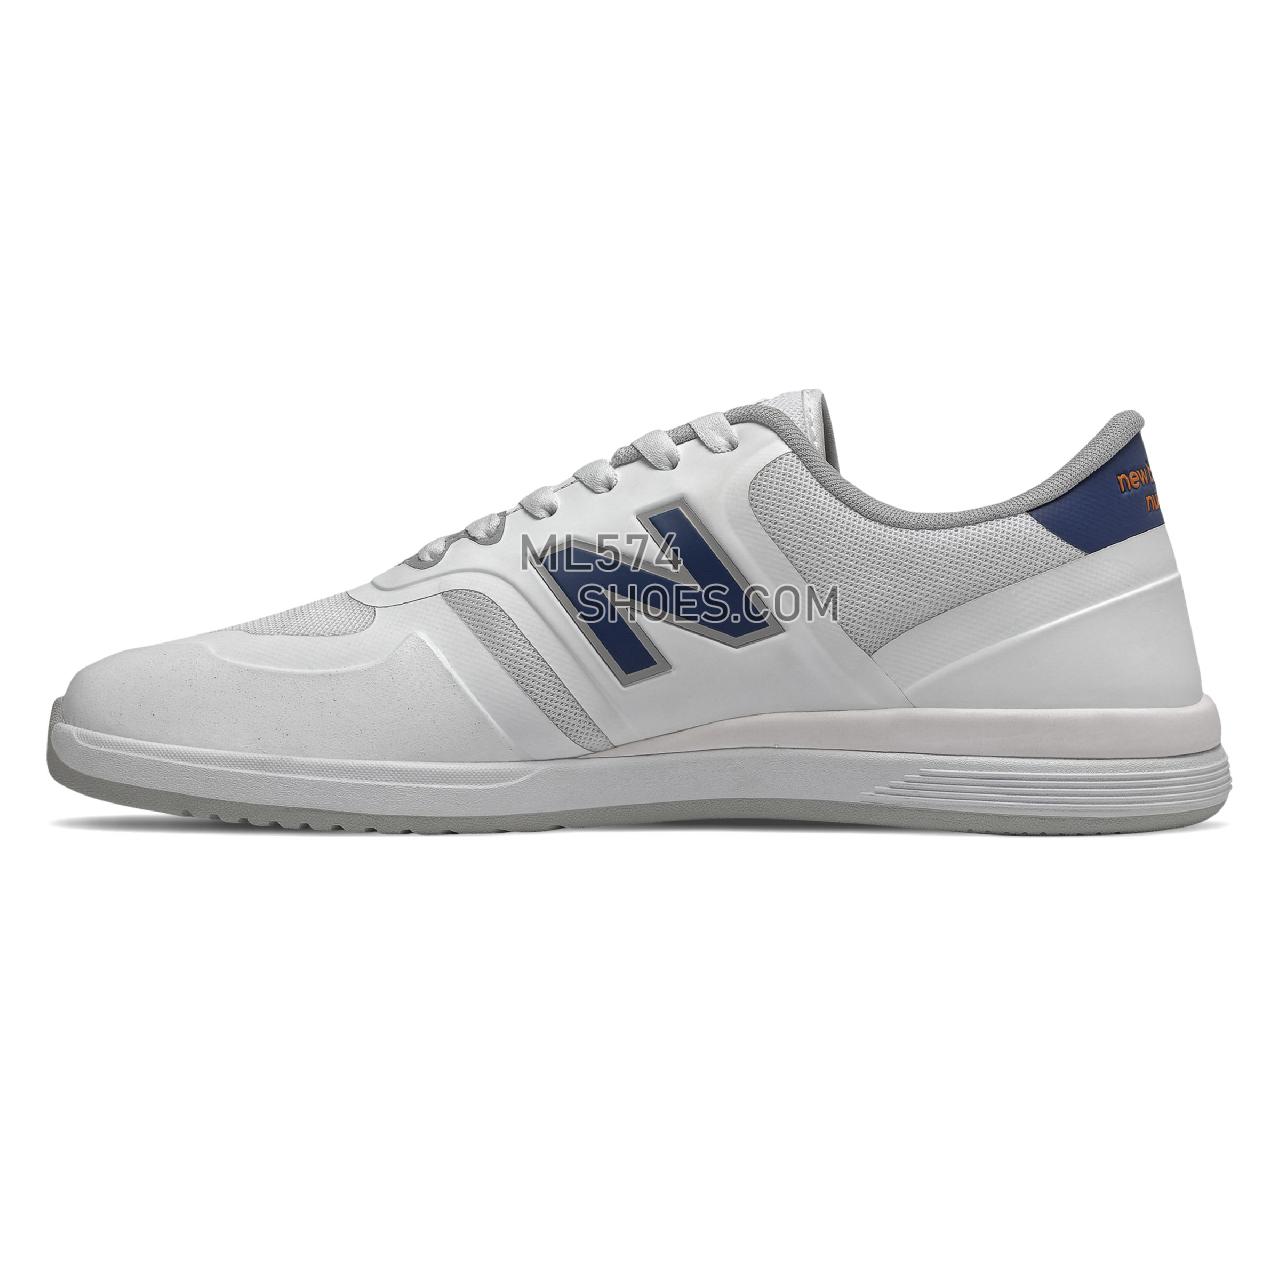 New Balance Numeric 420 - Men's NB Numeric Skate - White with Blue - NM420BWO